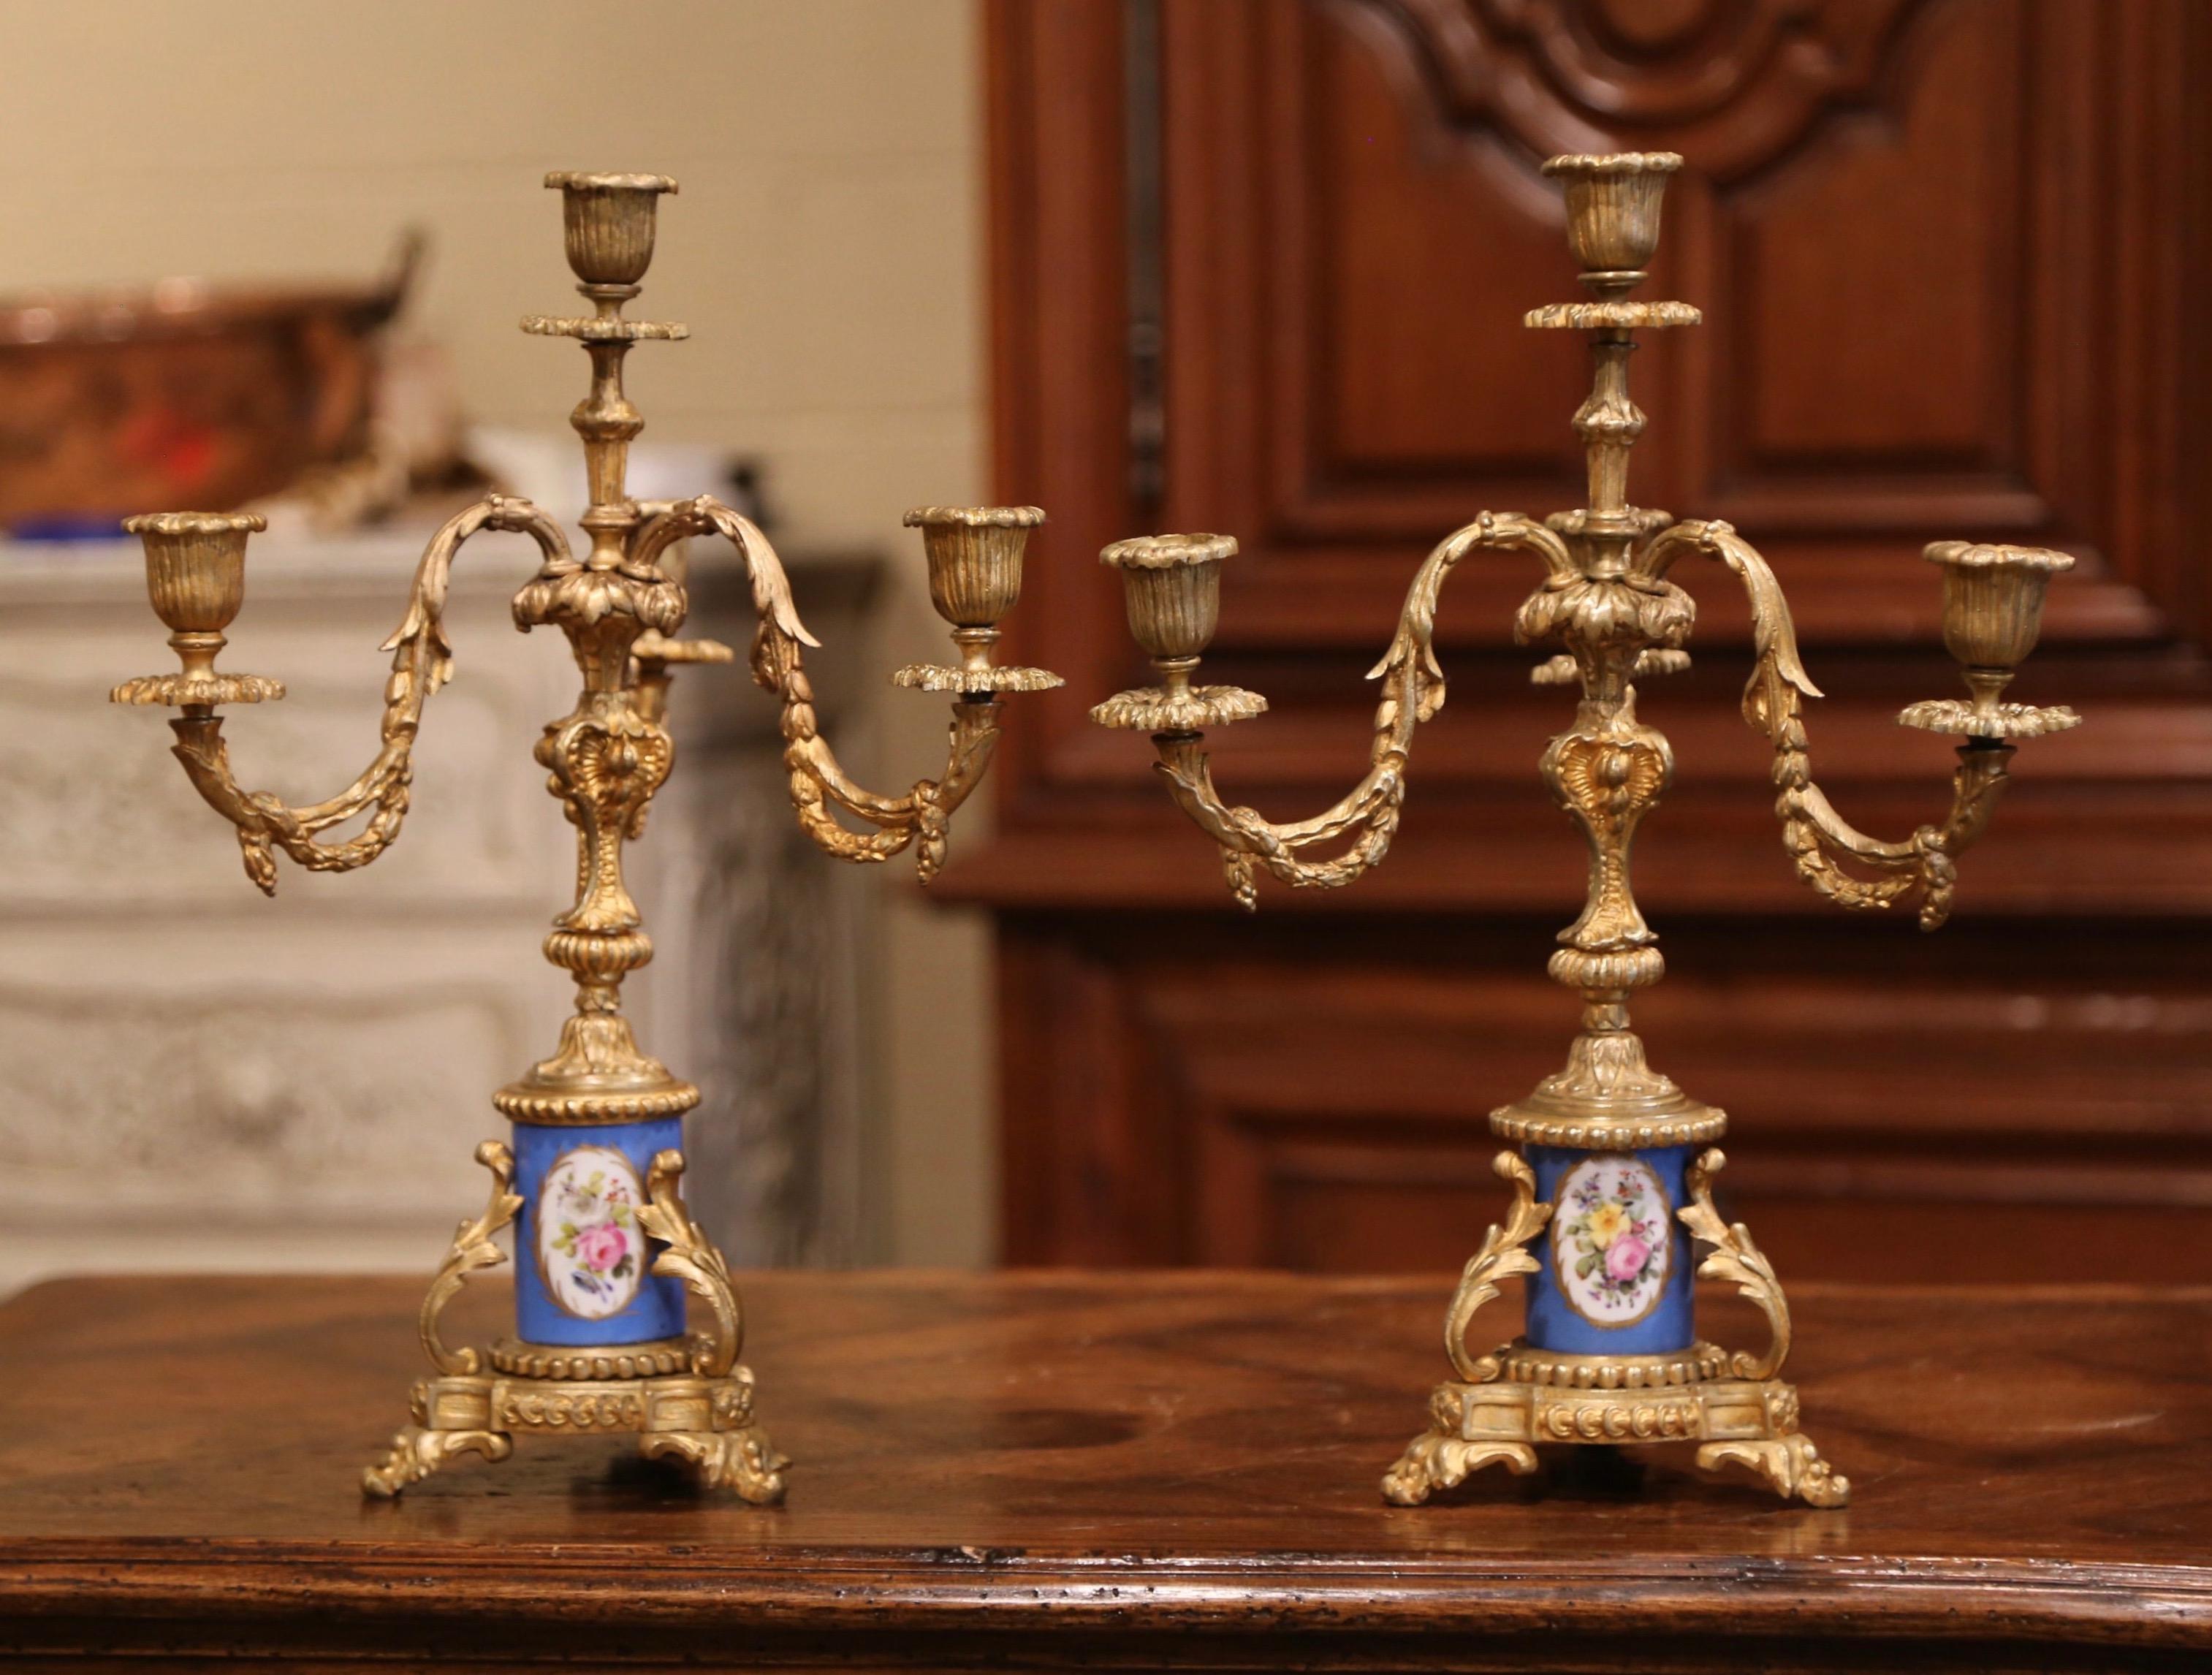 Pair of 19th Century French Louis XVI Bronze Dore and Porcelain Candelabras In Excellent Condition For Sale In Dallas, TX